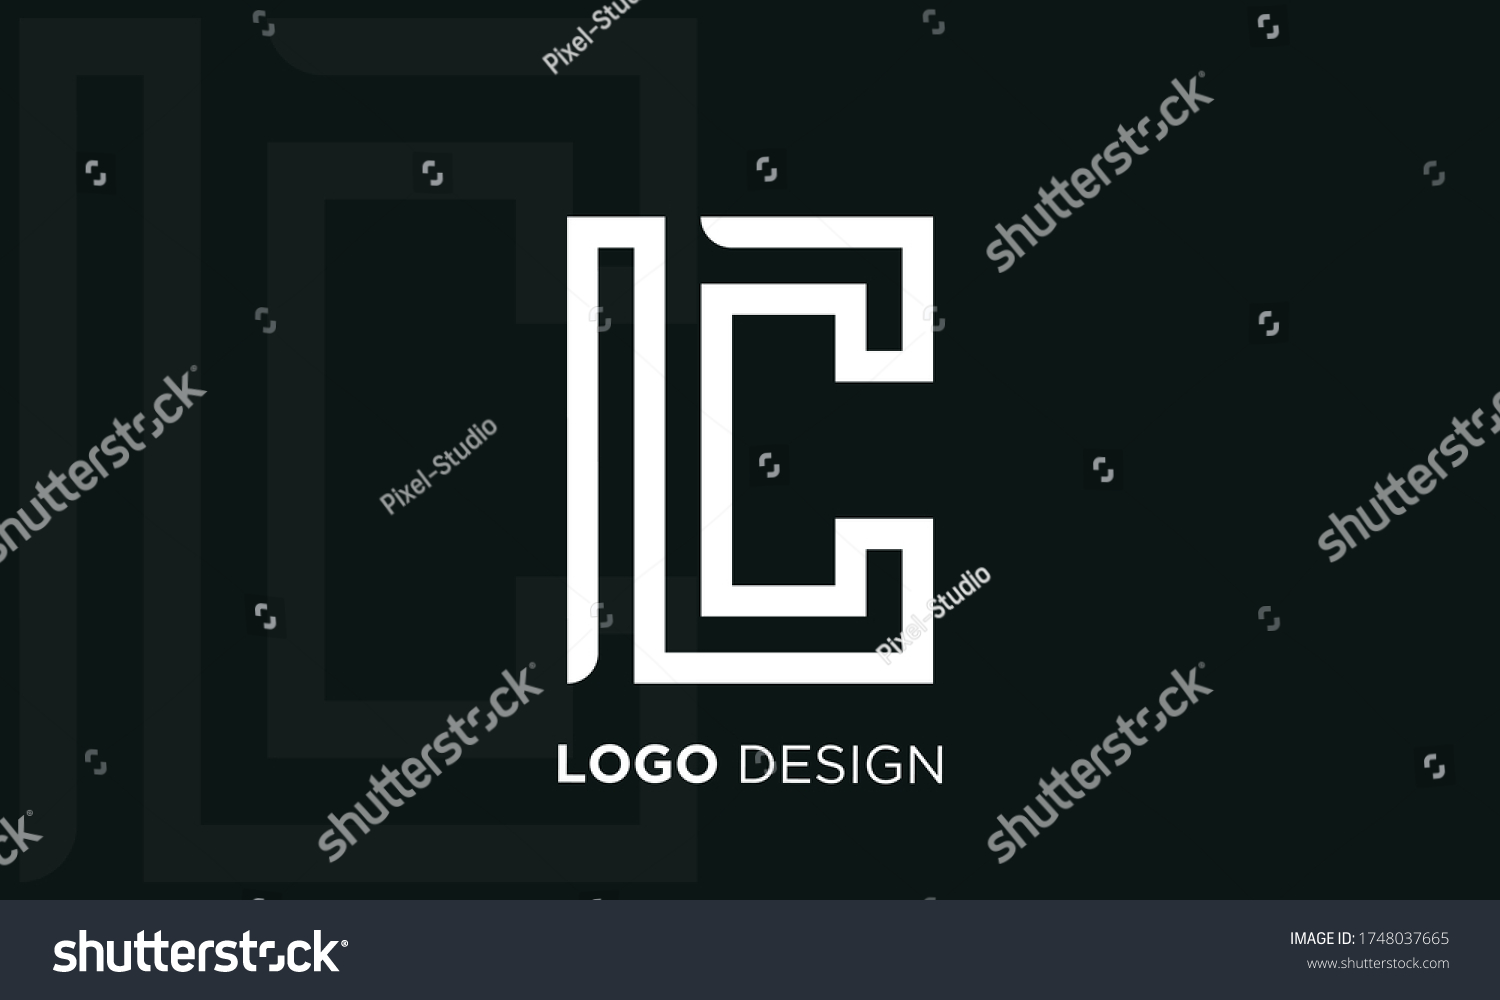 Icli Images, Stock Photos & Vectors | Shutterstock